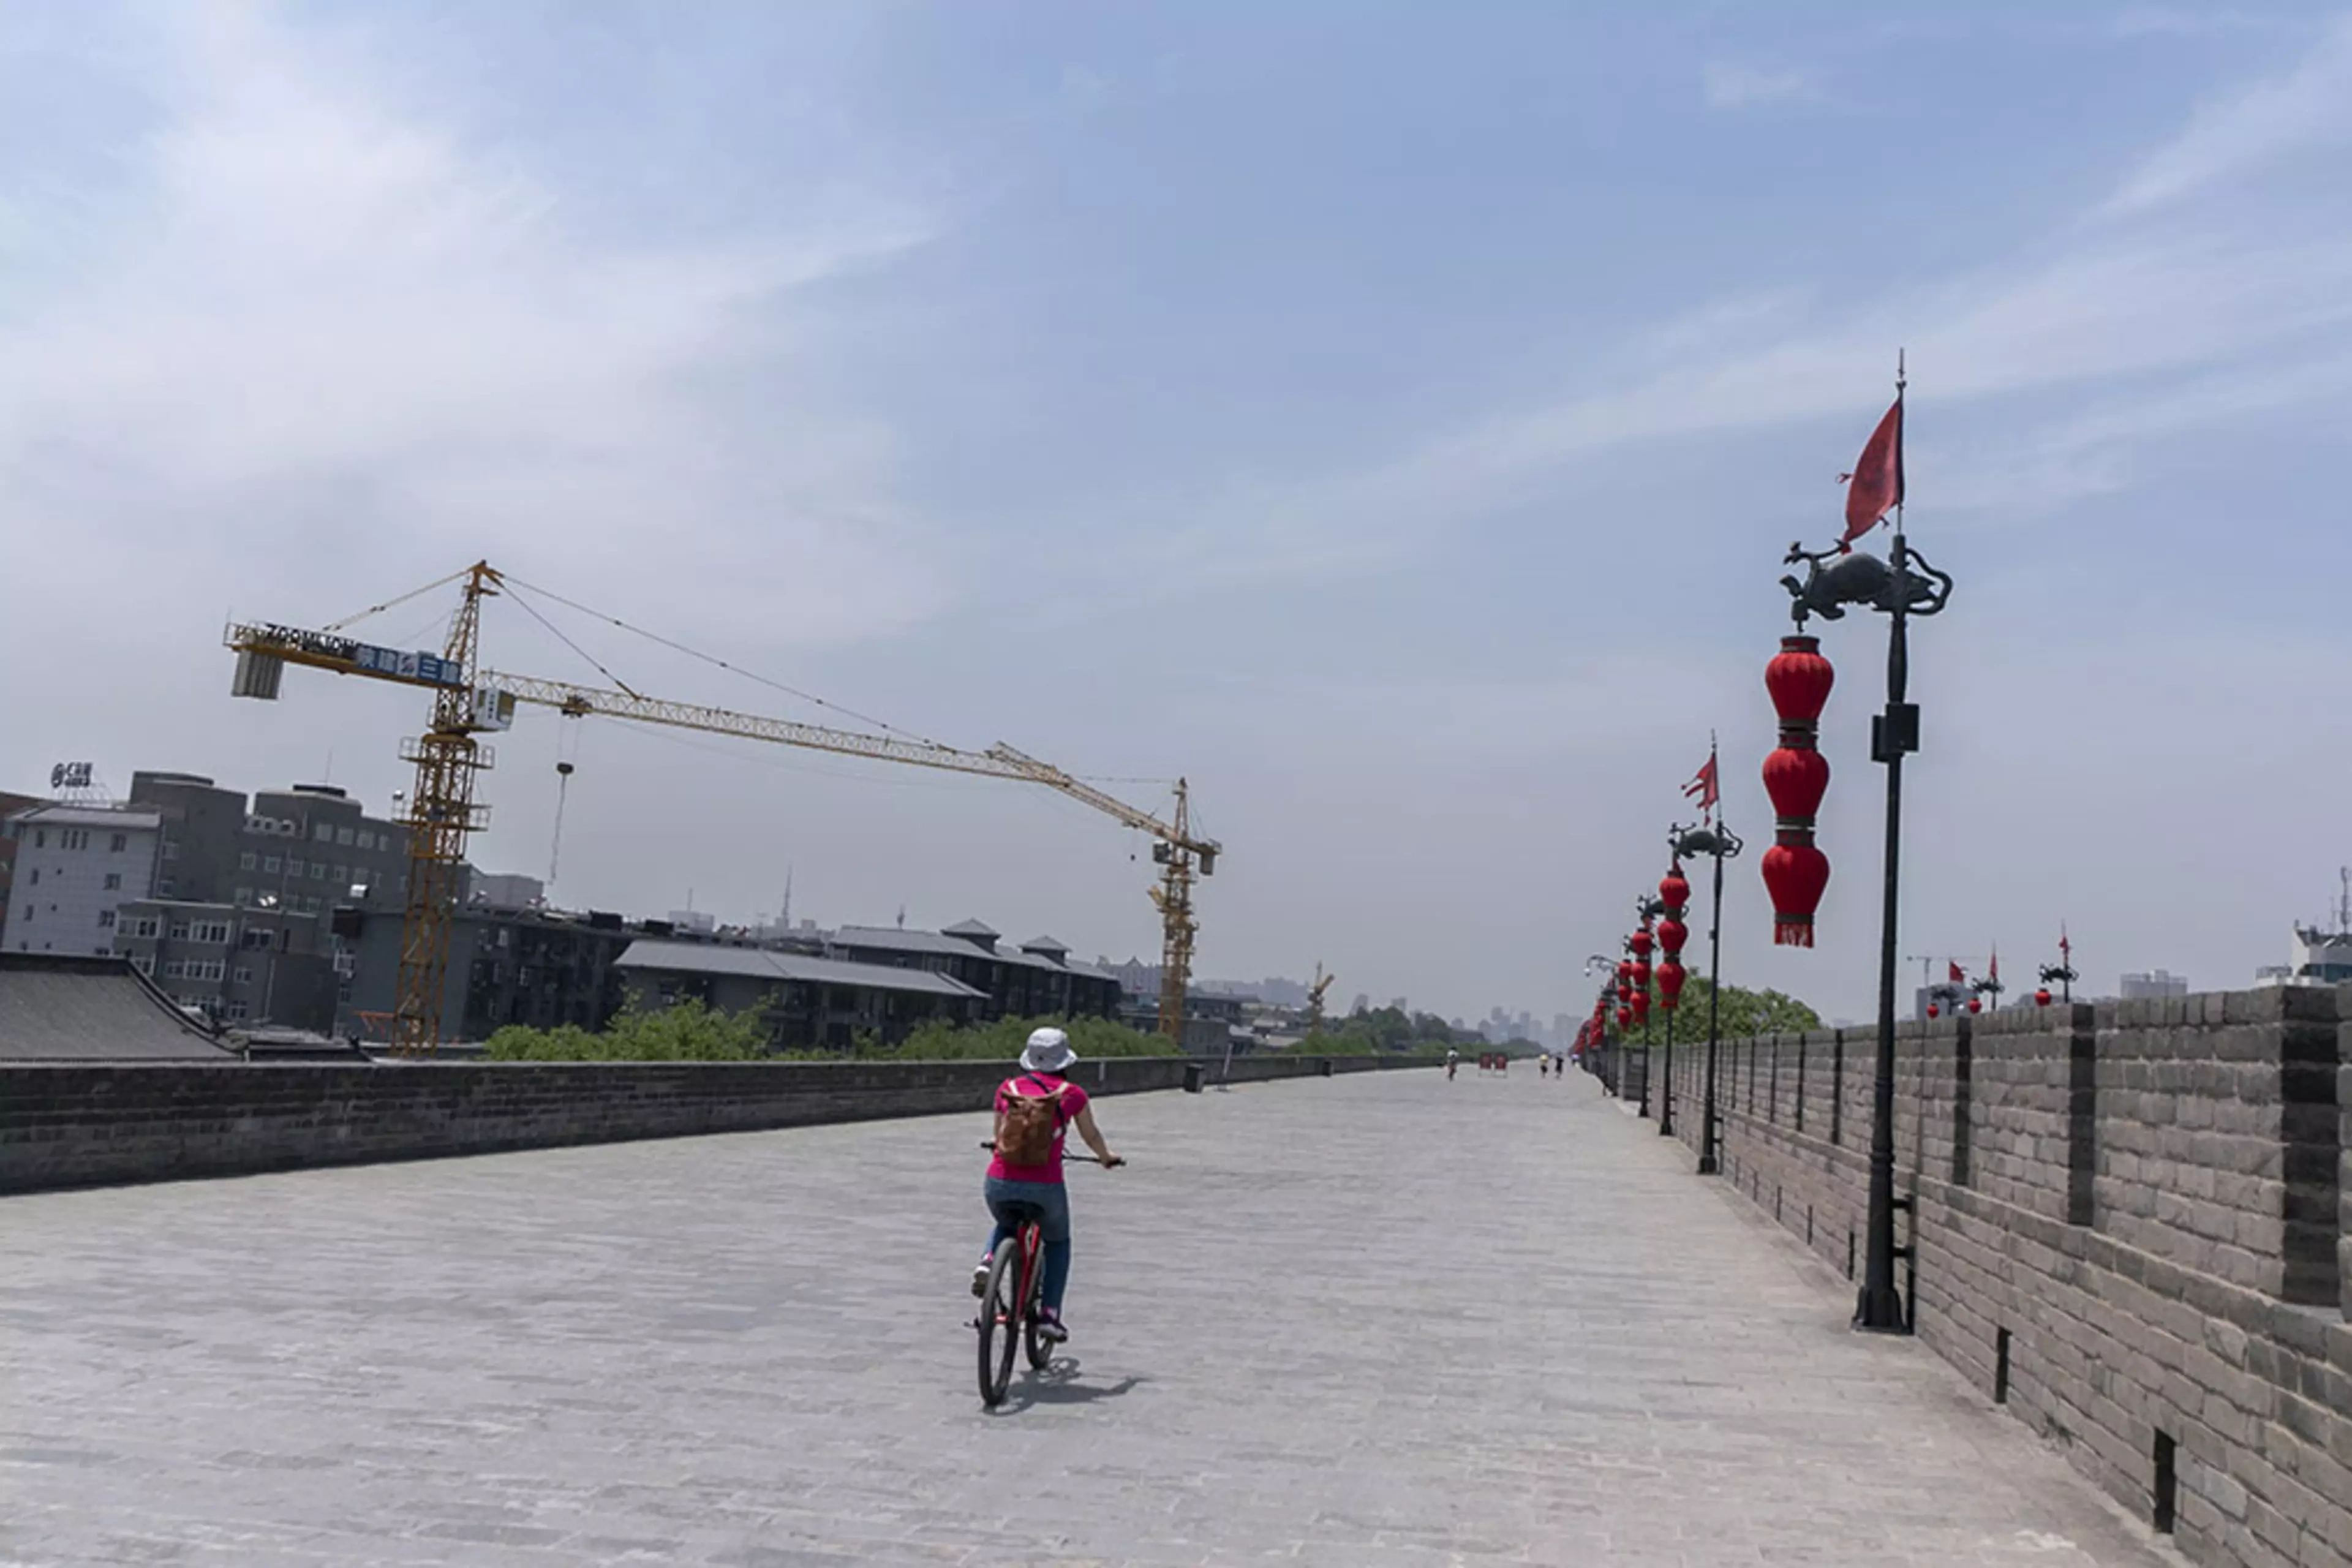 A cyclist passes by construction cranes in Xi'an, China.